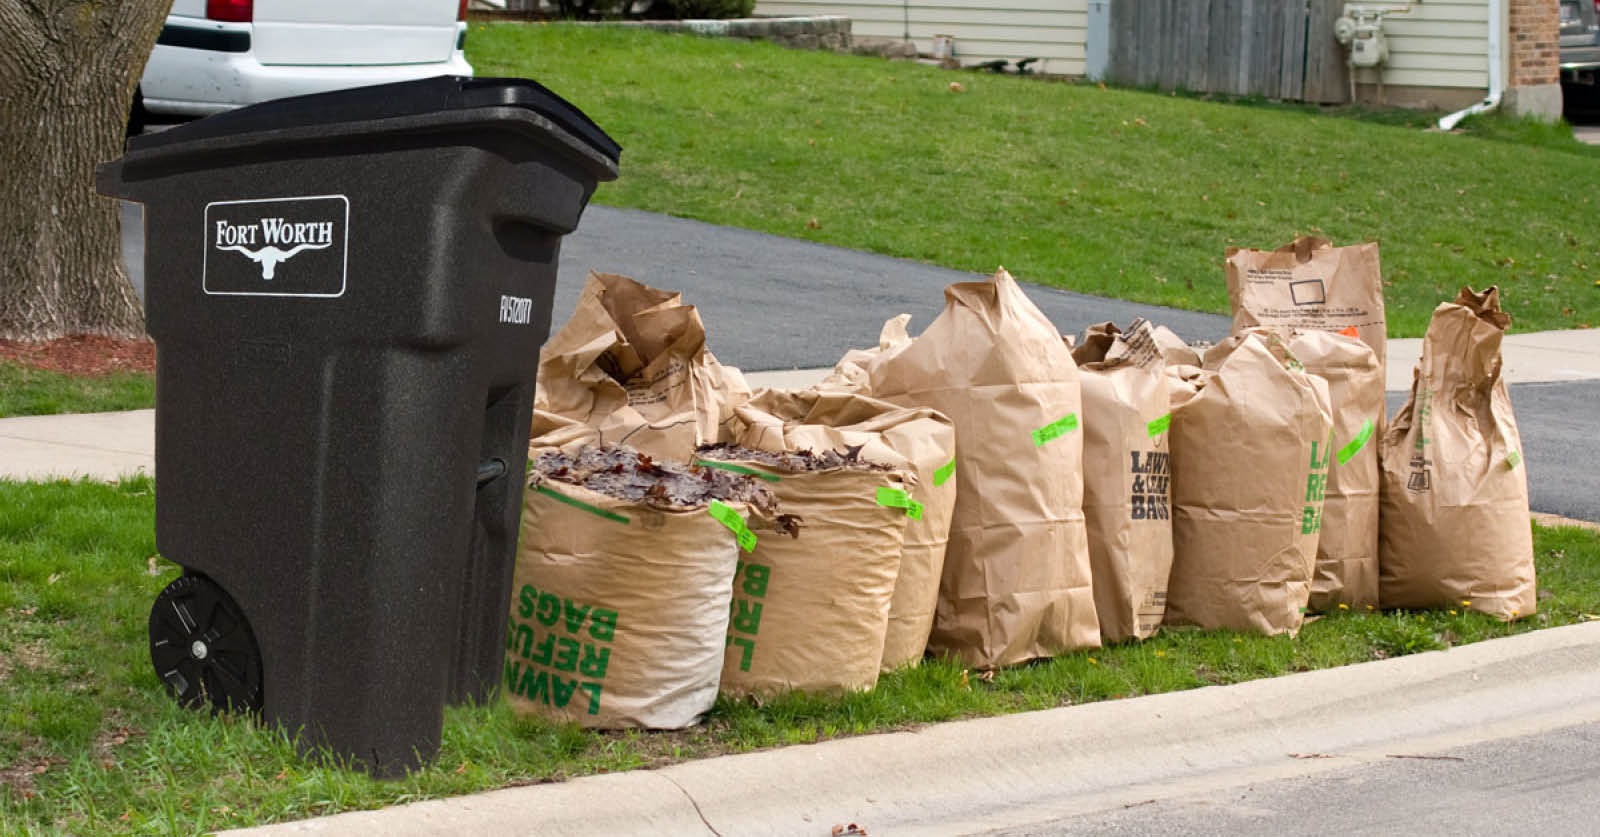 How to Place Your Garbage Cart at the Curb